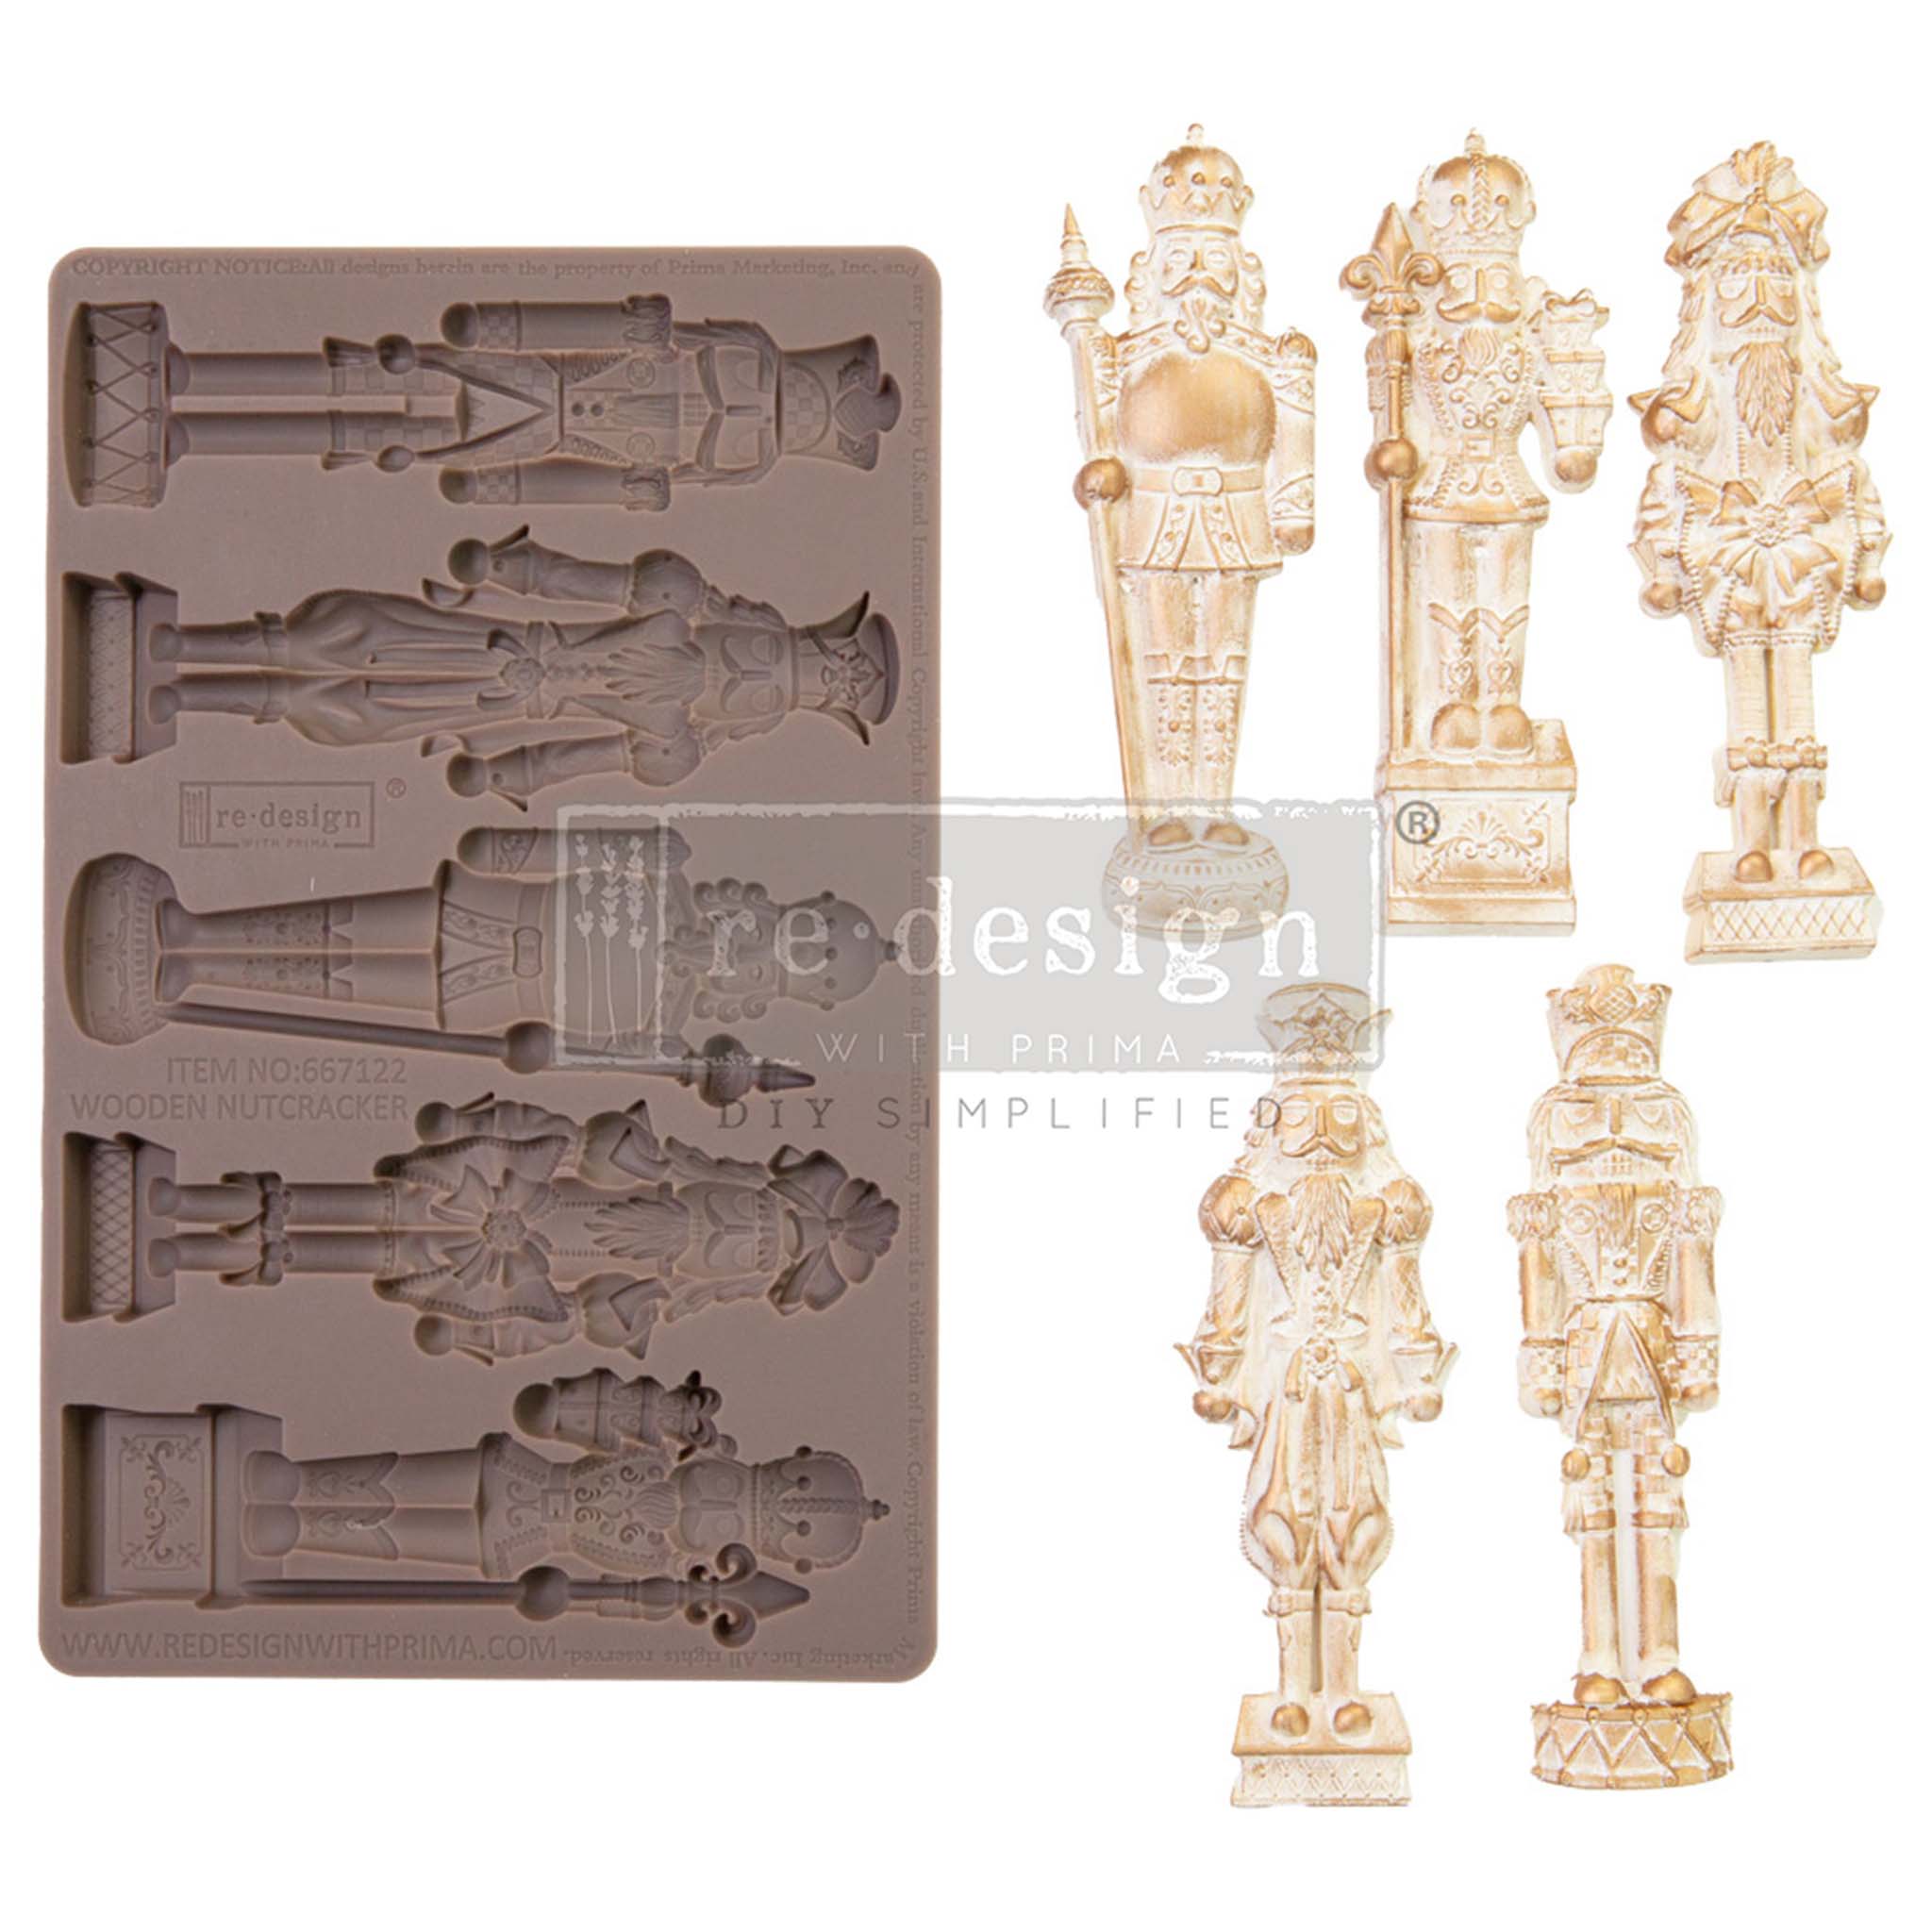 A brown silicone mould and gold/white castings of 5 intricately designed Nutcrackers are against a white background.